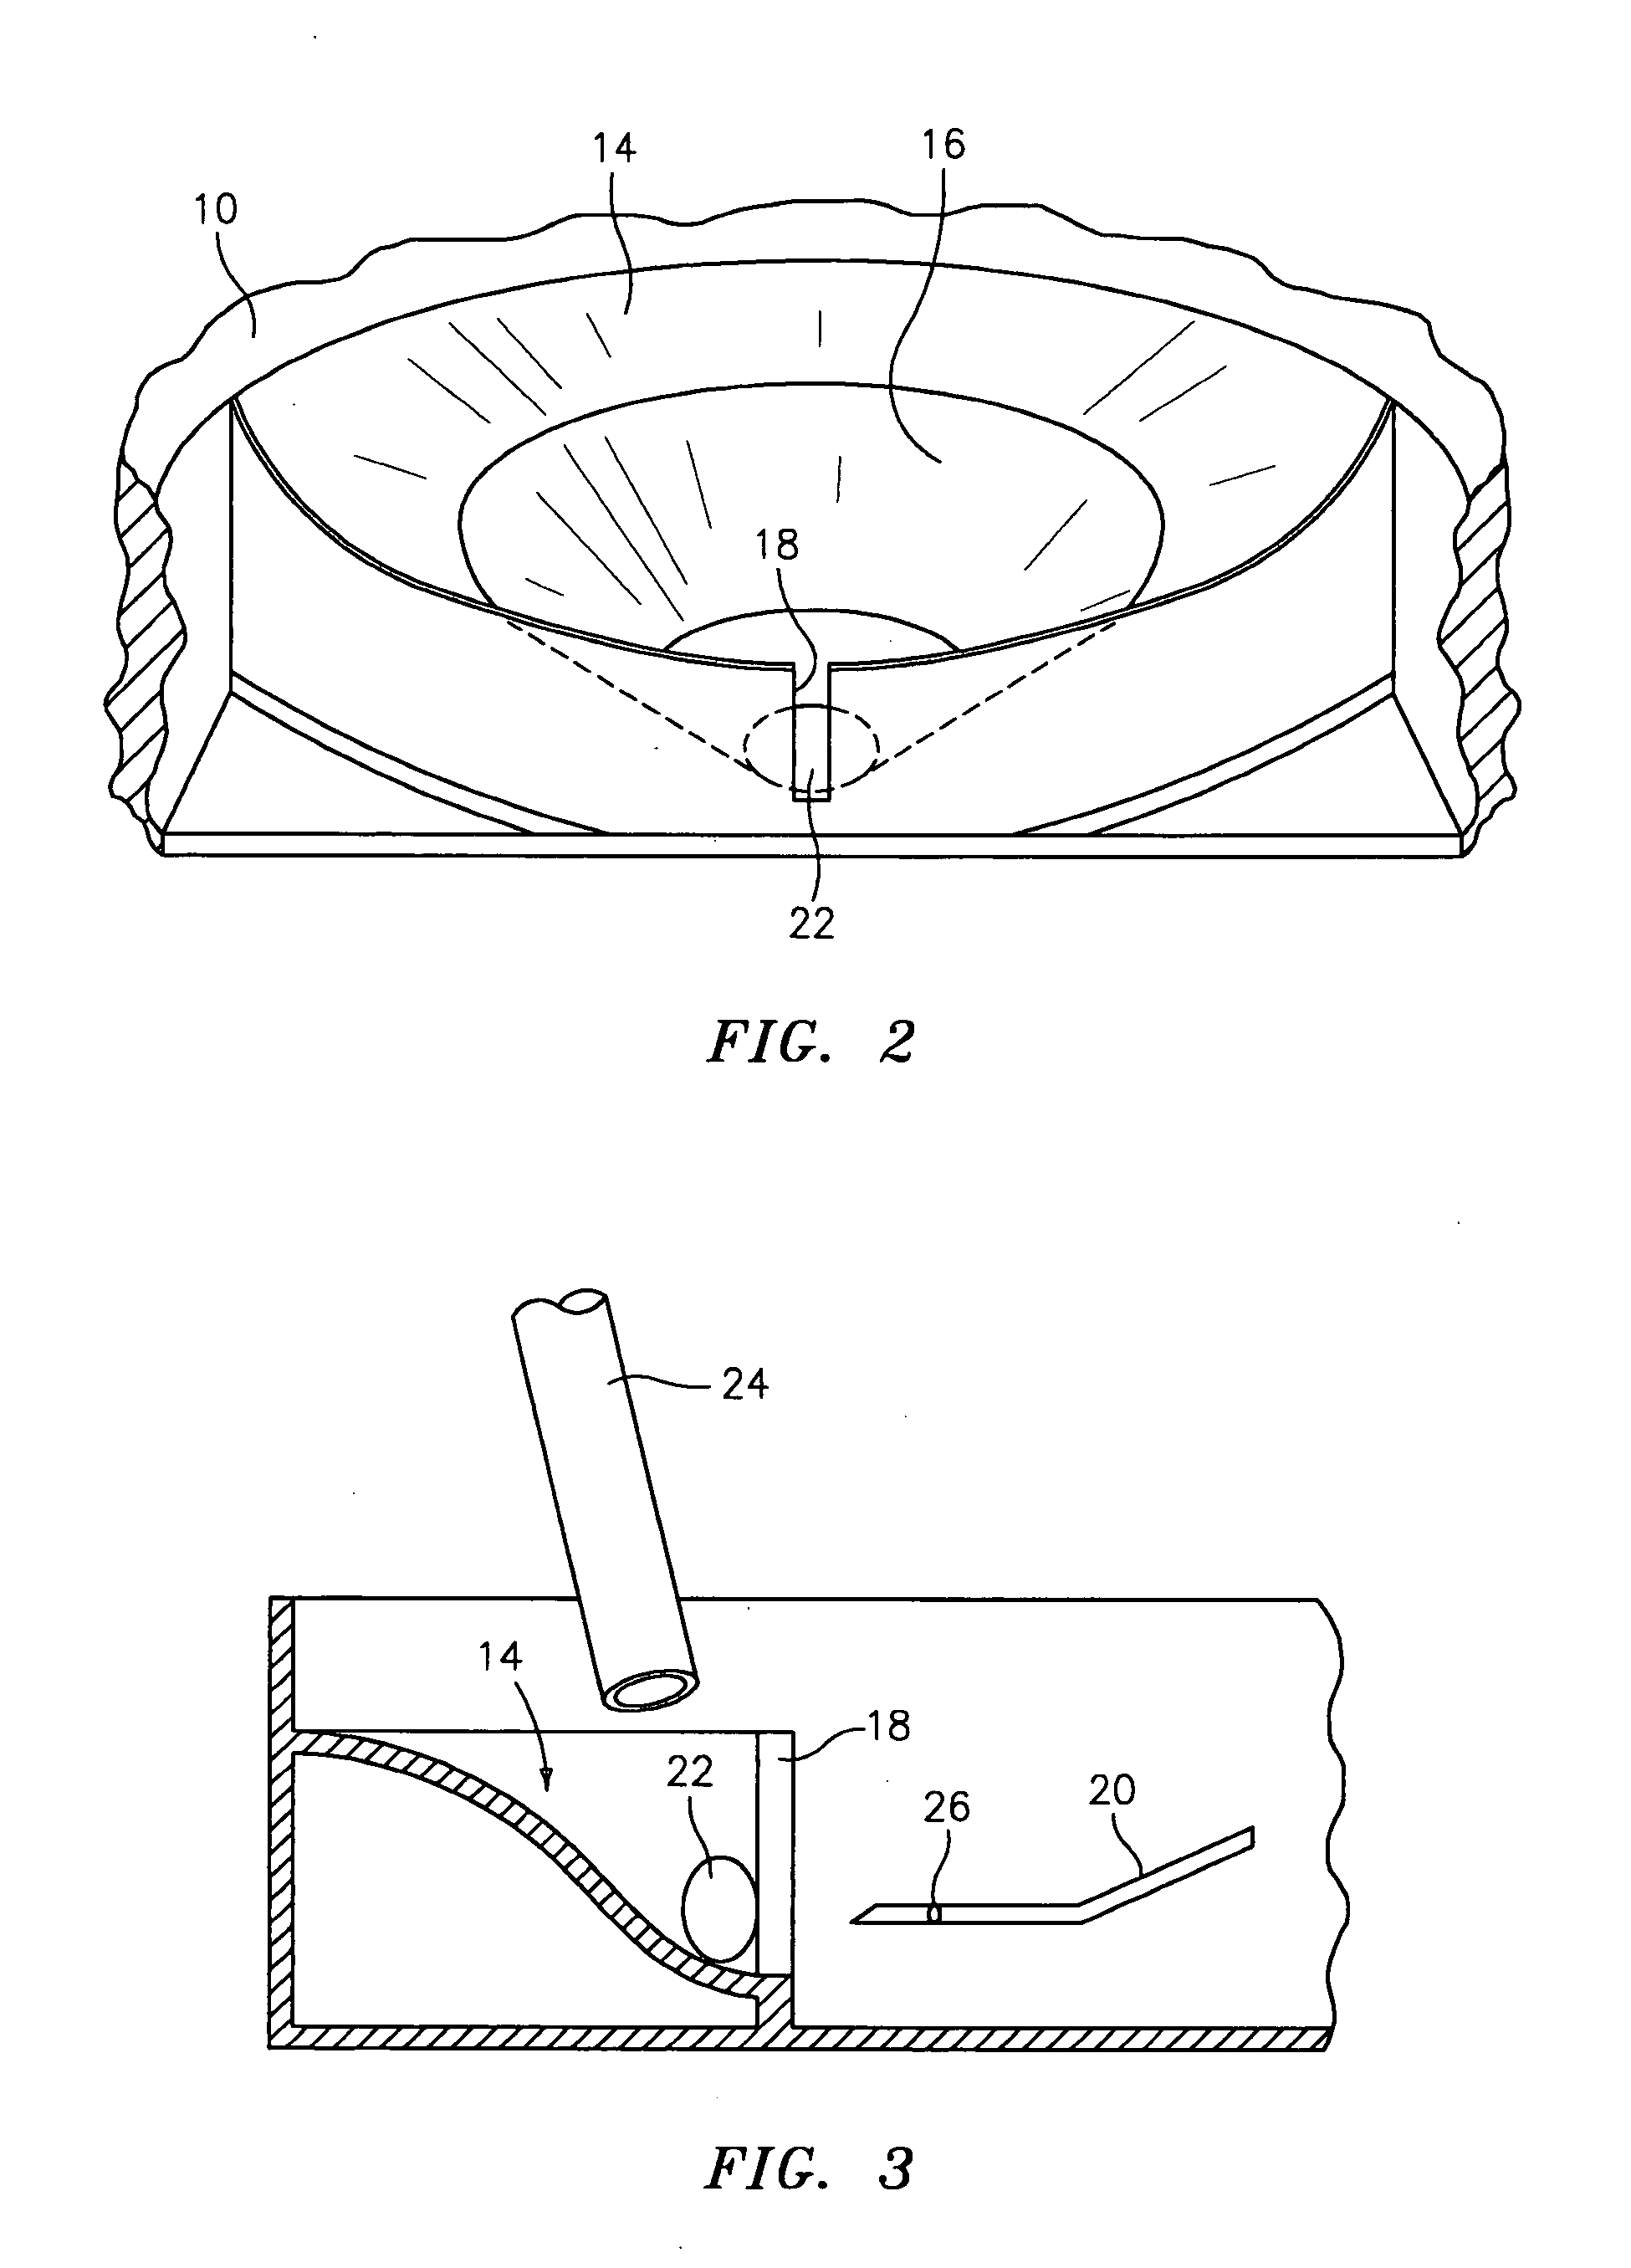 Specimen manipulation device for micro manipulation and biopsy in assisted reproduction and in vitro fertilization